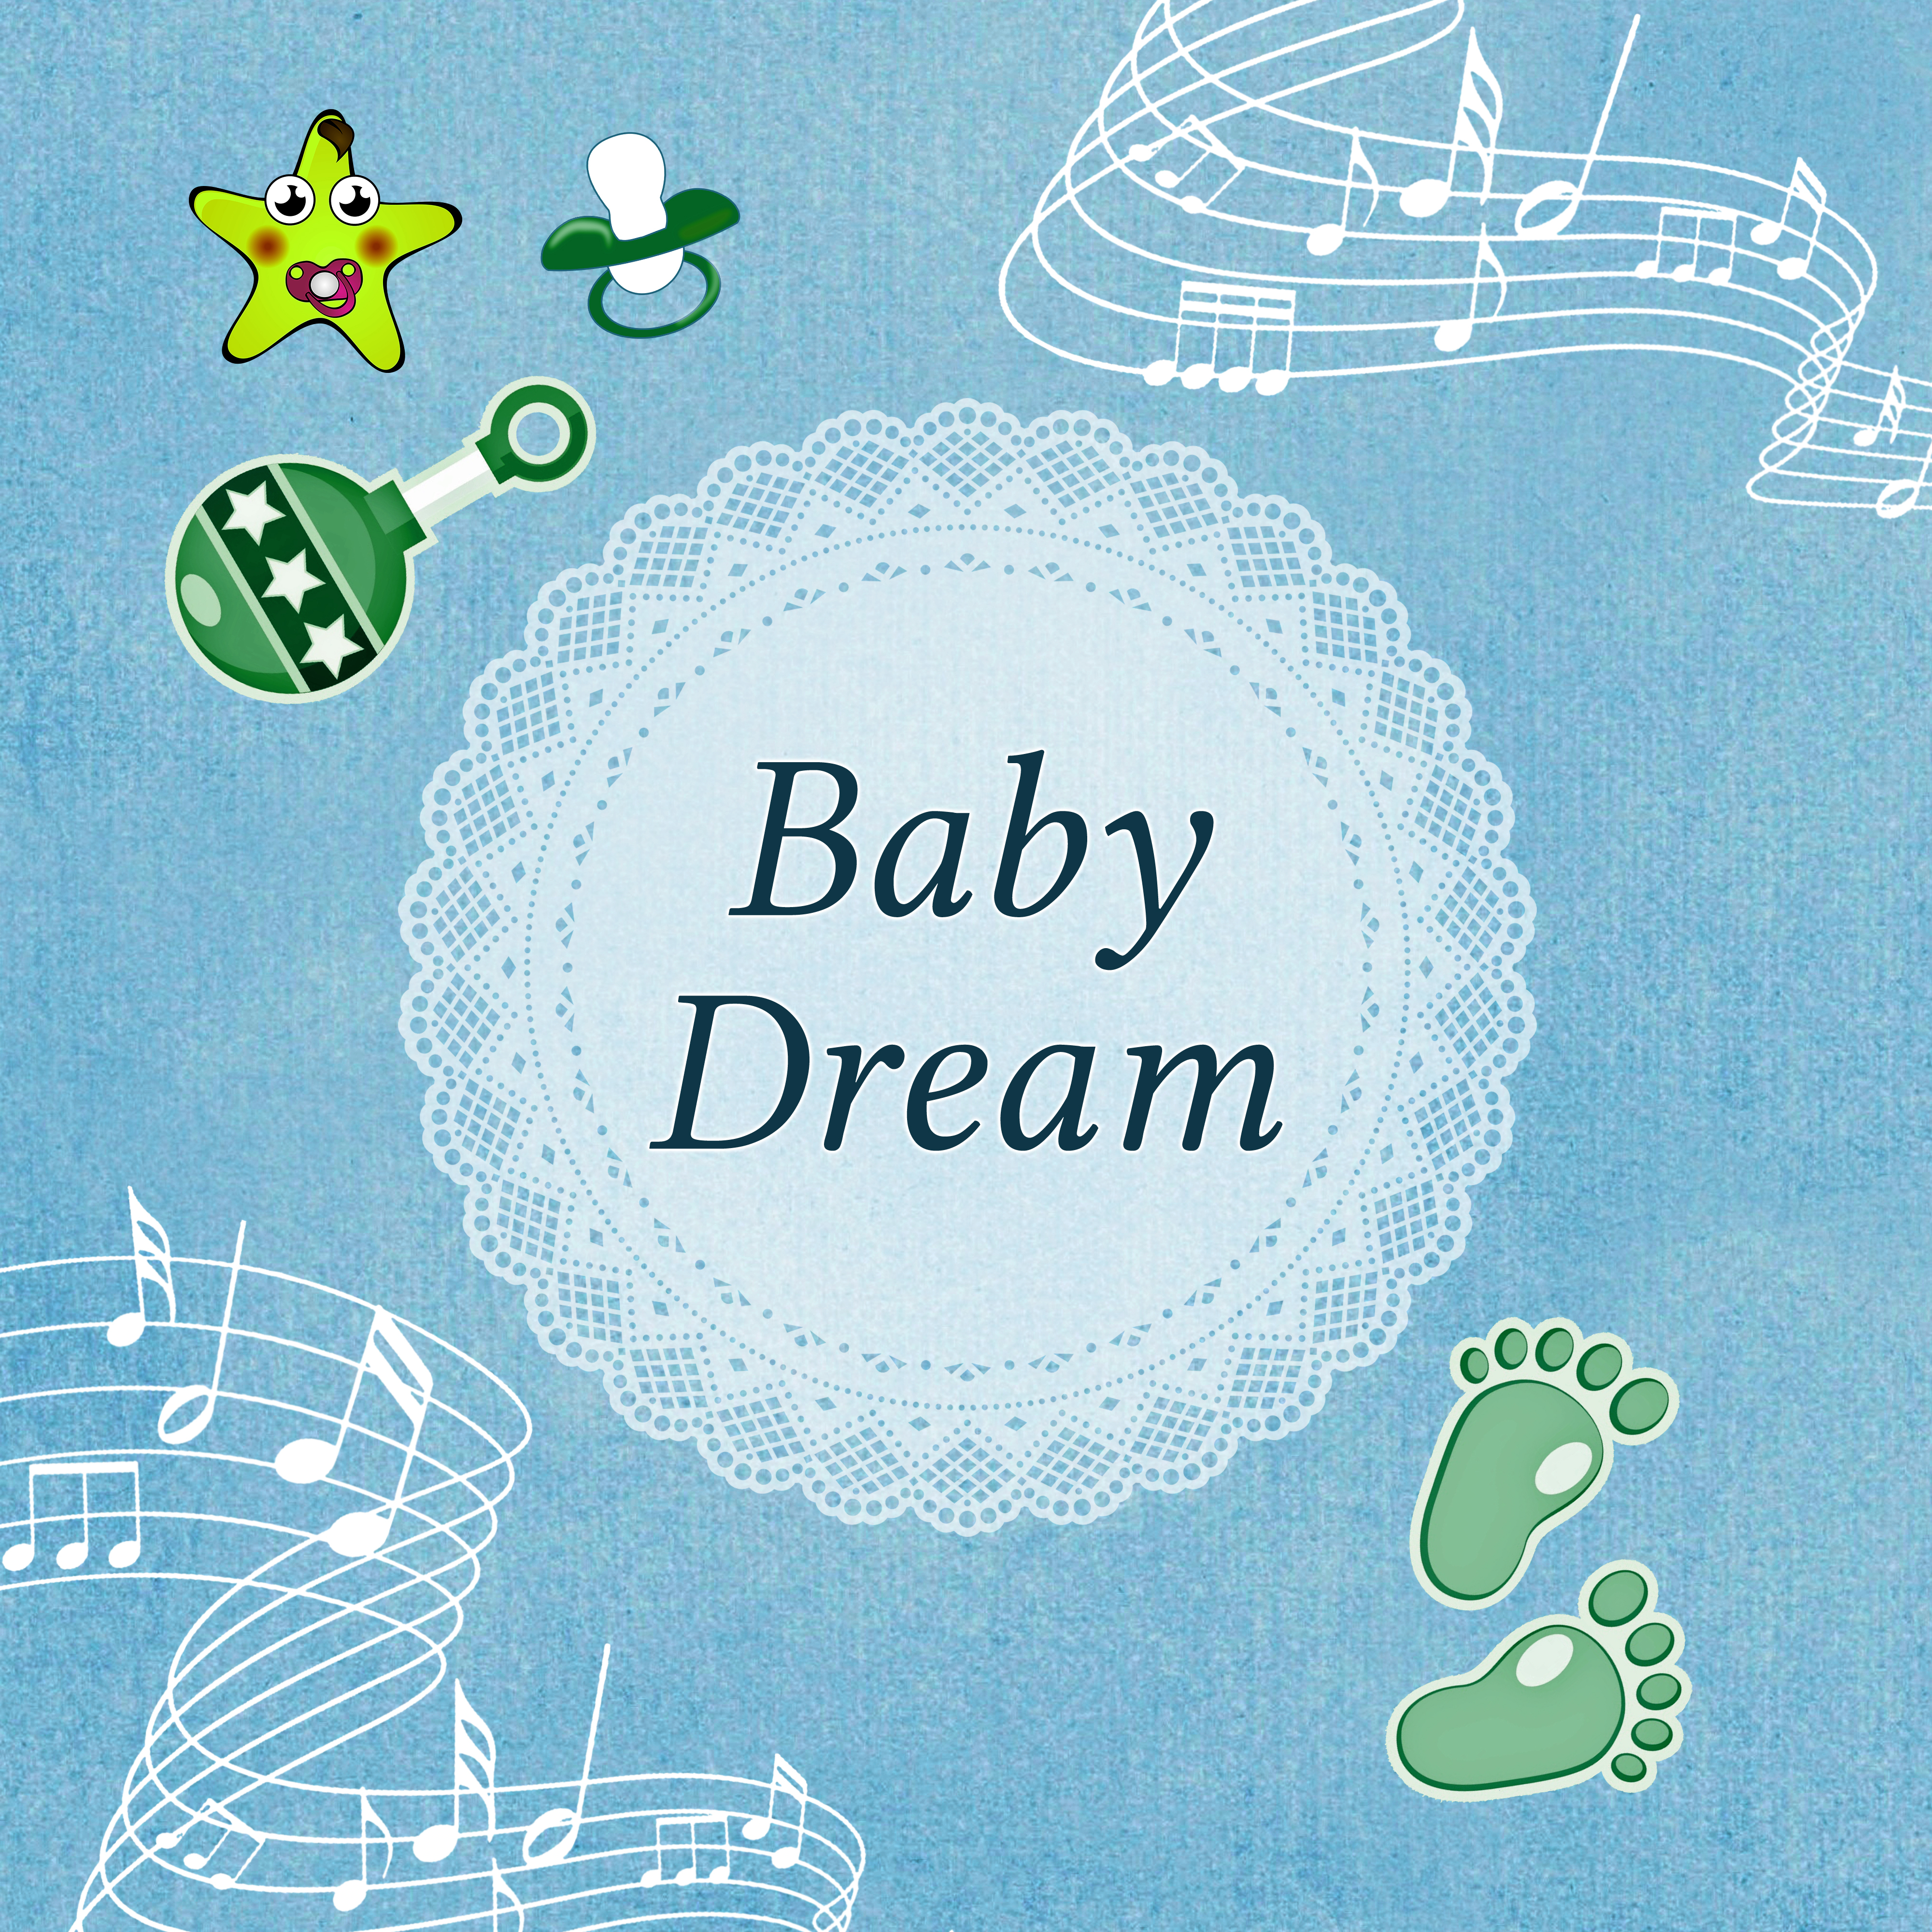 Baby Dream - Calm Nature Sounds for Insomnia, Deep Sleep, Dream, Calming Music, Good Night, Baby White Noise, Peaceful Music